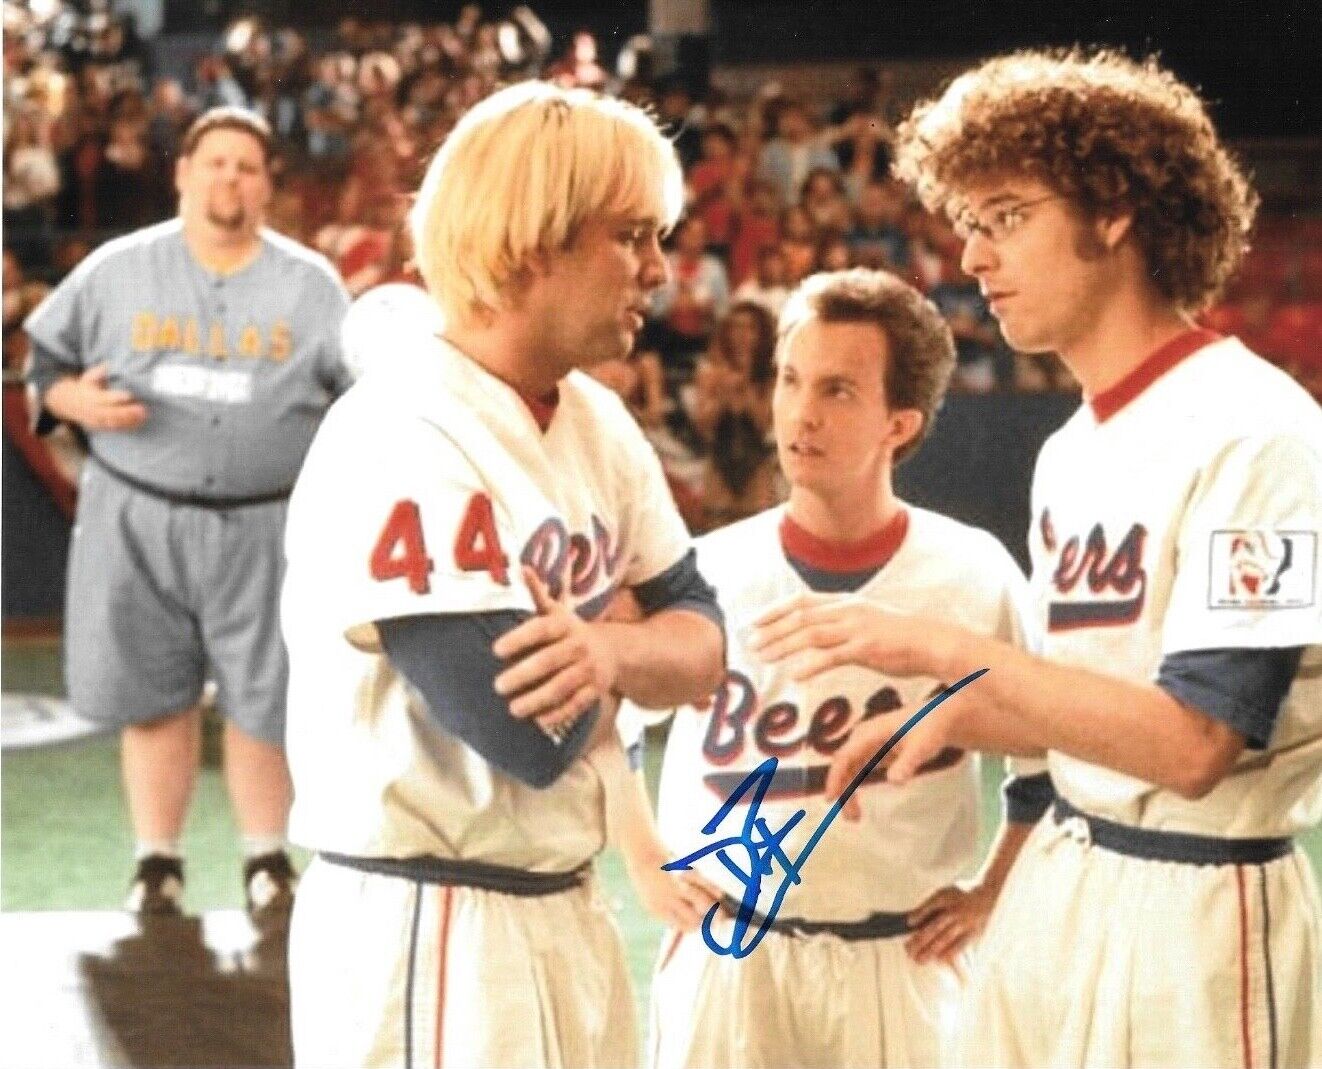 * DIAN BACHAR * signed 8x10 Photo Poster painting * BASEketball SQUEAK * COA * PROOF * 8